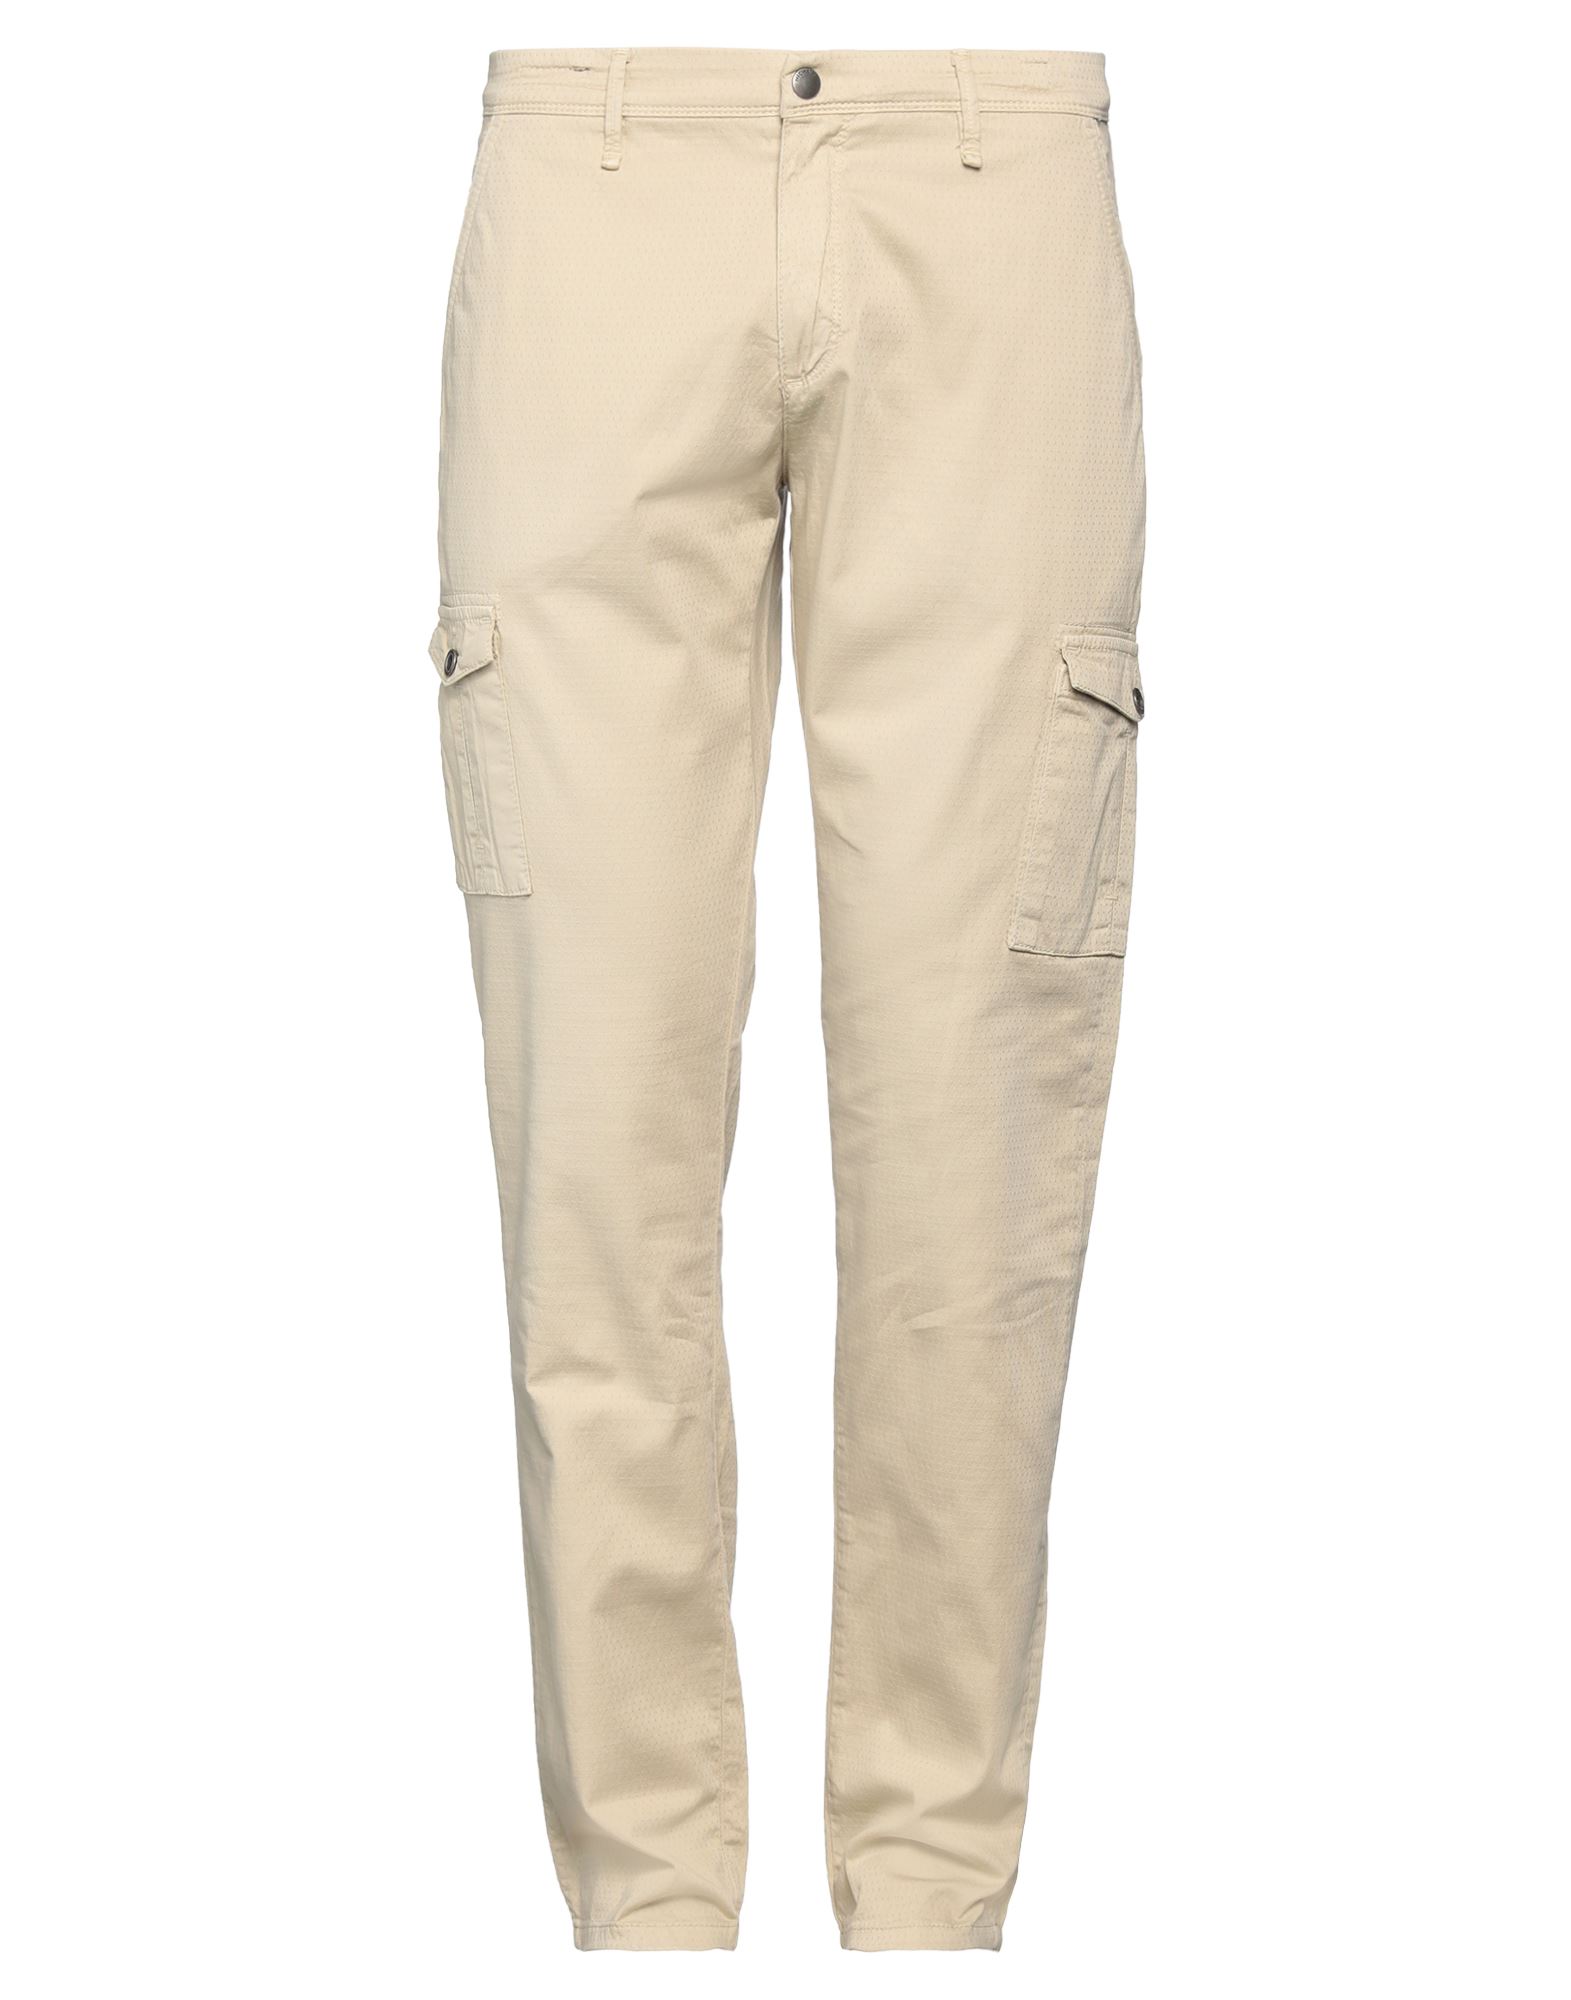 Nicwave Pants In Neutrals